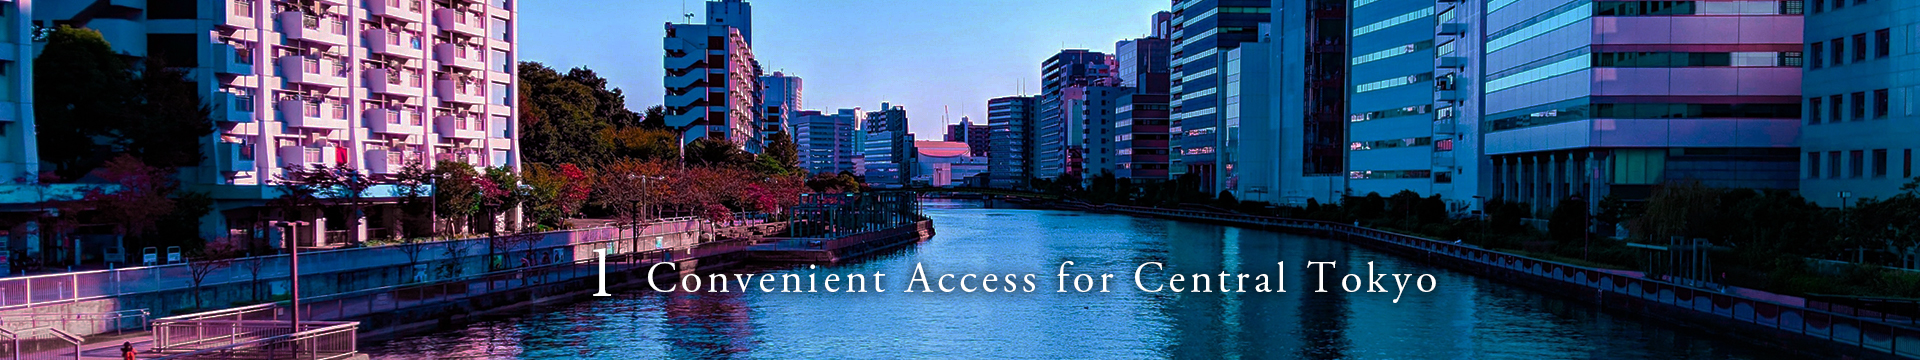 1 Convenient Access for Central Tokyo